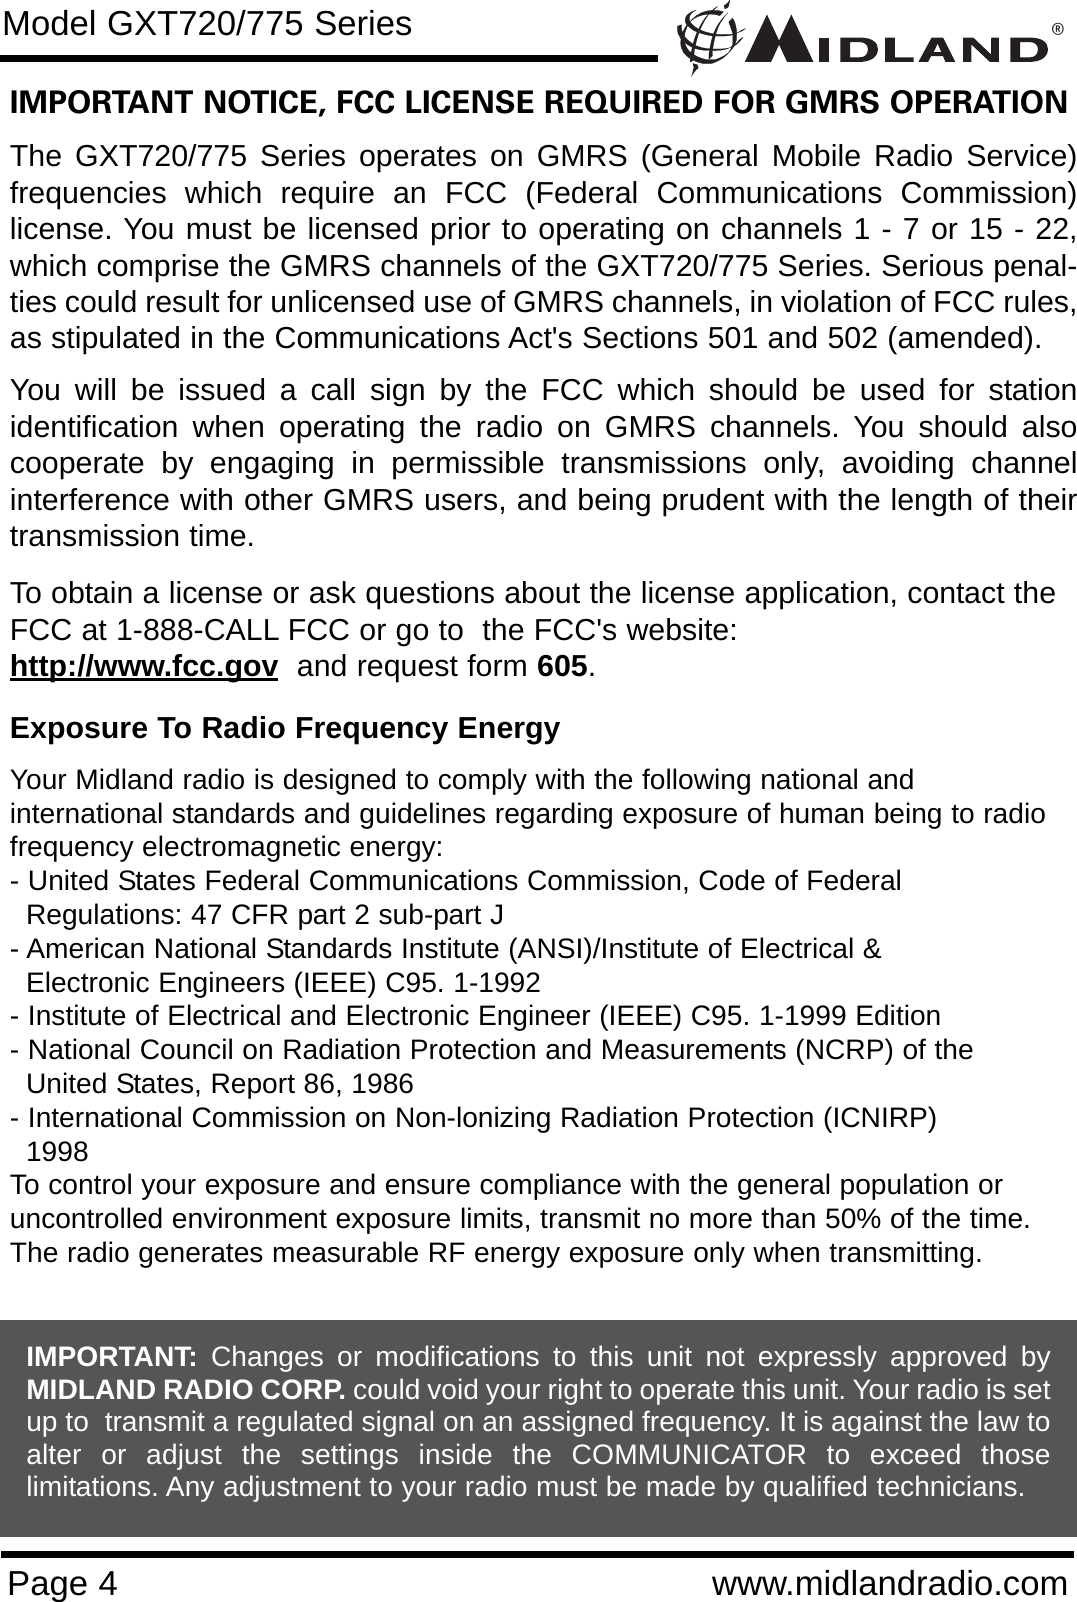 ®Page 4 www.midlandradio.comIMPORTANT NOTICE, FCC LICENSE REQUIRED FOR GMRS OPERATIONThe GXT720/775 Series operates on GMRS (General Mobile Radio Service)frequencies which require an FCC (Federal Communications Commission)license. You must be licensed prior to operating on channels 1 - 7 or 15 - 22,which comprise the GMRS channels of the GXT720/775 Series. Serious penal-ties could result for unlicensed use of GMRS channels, in violation of FCC rules,as stipulated in the Communications Act&apos;s Sections 501 and 502 (amended).You will be issued a call sign by the FCC which should be used for stationidentification when operating the radio on GMRS channels. You should alsocooperate by engaging in permissible transmissions only, avoiding channelinterference with other GMRS users, and being prudent with the length of theirtransmission time.To obtain a license or ask questions about the license application, contact theFCC at 1-888-CALL FCC or go to  the FCC&apos;s website:  http://www.fcc.gov and request form 605.Exposure To Radio Frequency EnergyYour Midland radio is designed to comply with the following national and international standards and guidelines regarding exposure of human being to radiofrequency electromagnetic energy:- United States Federal Communications Commission, Code of Federal Regulations: 47 CFR part 2 sub-part J- American National Standards Institute (ANSI)/Institute of Electrical &amp; Electronic Engineers (IEEE) C95. 1-1992- Institute of Electrical and Electronic Engineer (IEEE) C95. 1-1999 Edition- National Council on Radiation Protection and Measurements (NCRP) of the United States, Report 86, 1986- International Commission on Non-lonizing Radiation Protection (ICNIRP) 1998To control your exposure and ensure compliance with the general population oruncontrolled environment exposure limits, transmit no more than 50% of the time.The radio generates measurable RF energy exposure only when transmitting.Model GXT720/775 SeriesIMPORTANT: Changes or modifications to this unit not expressly approved byMIDLAND RADIO CORP. could void your right to operate this unit. Your radio is setup to  transmit a regulated signal on an assigned frequency. It is against the law toalter or adjust the settings inside the COMMUNICATOR to exceed thoselimitations. Any adjustment to your radio must be made by qualified technicians.